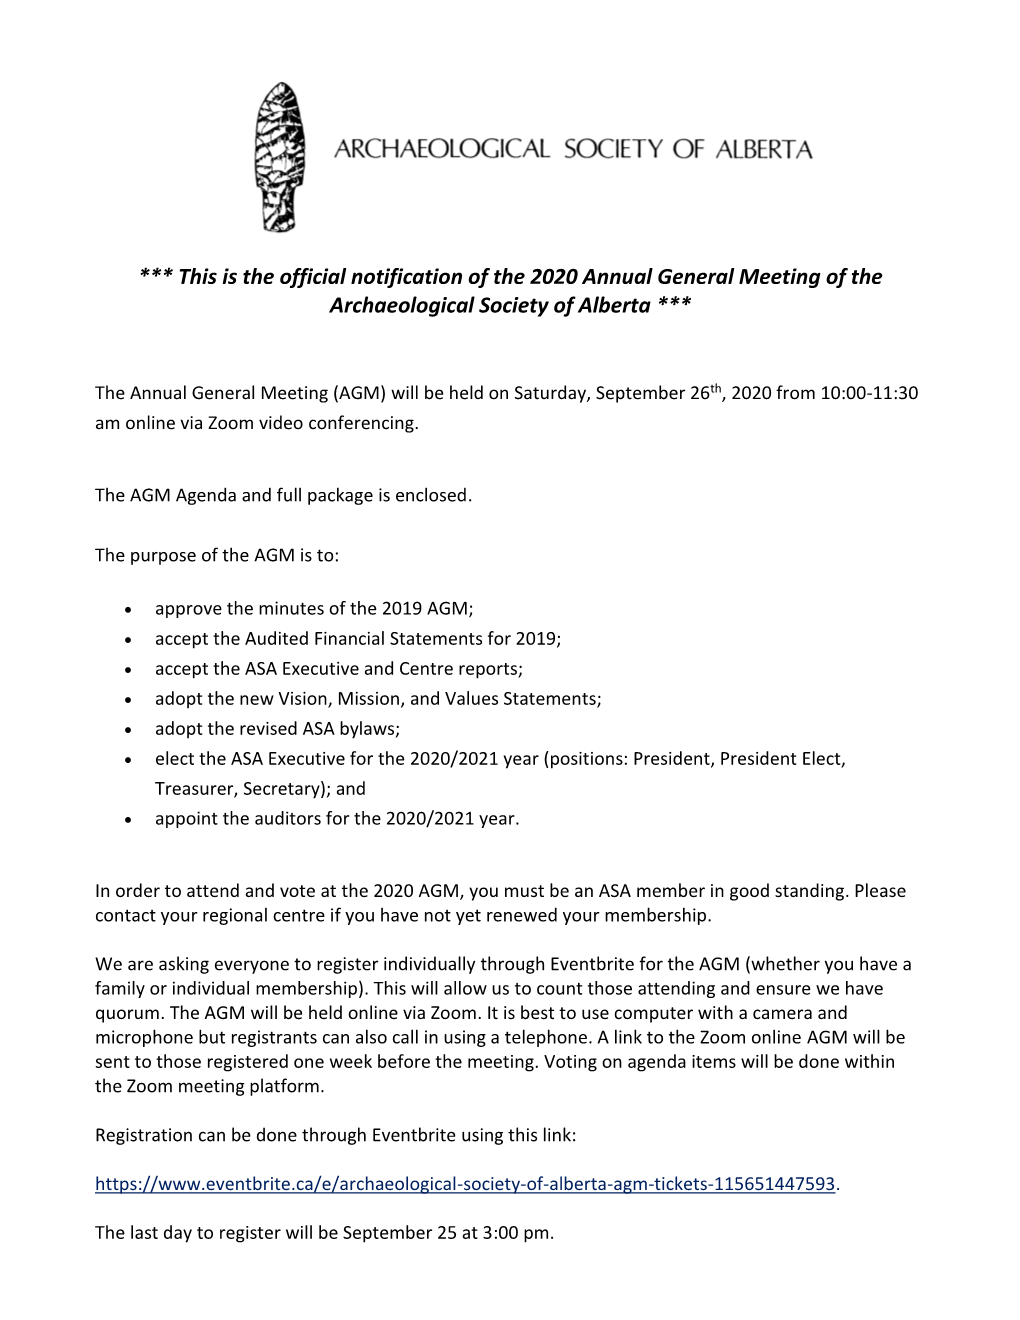 This Is the Official Notification of the 2020 Annual General Meeting of the Archaeological Society of Alberta ***